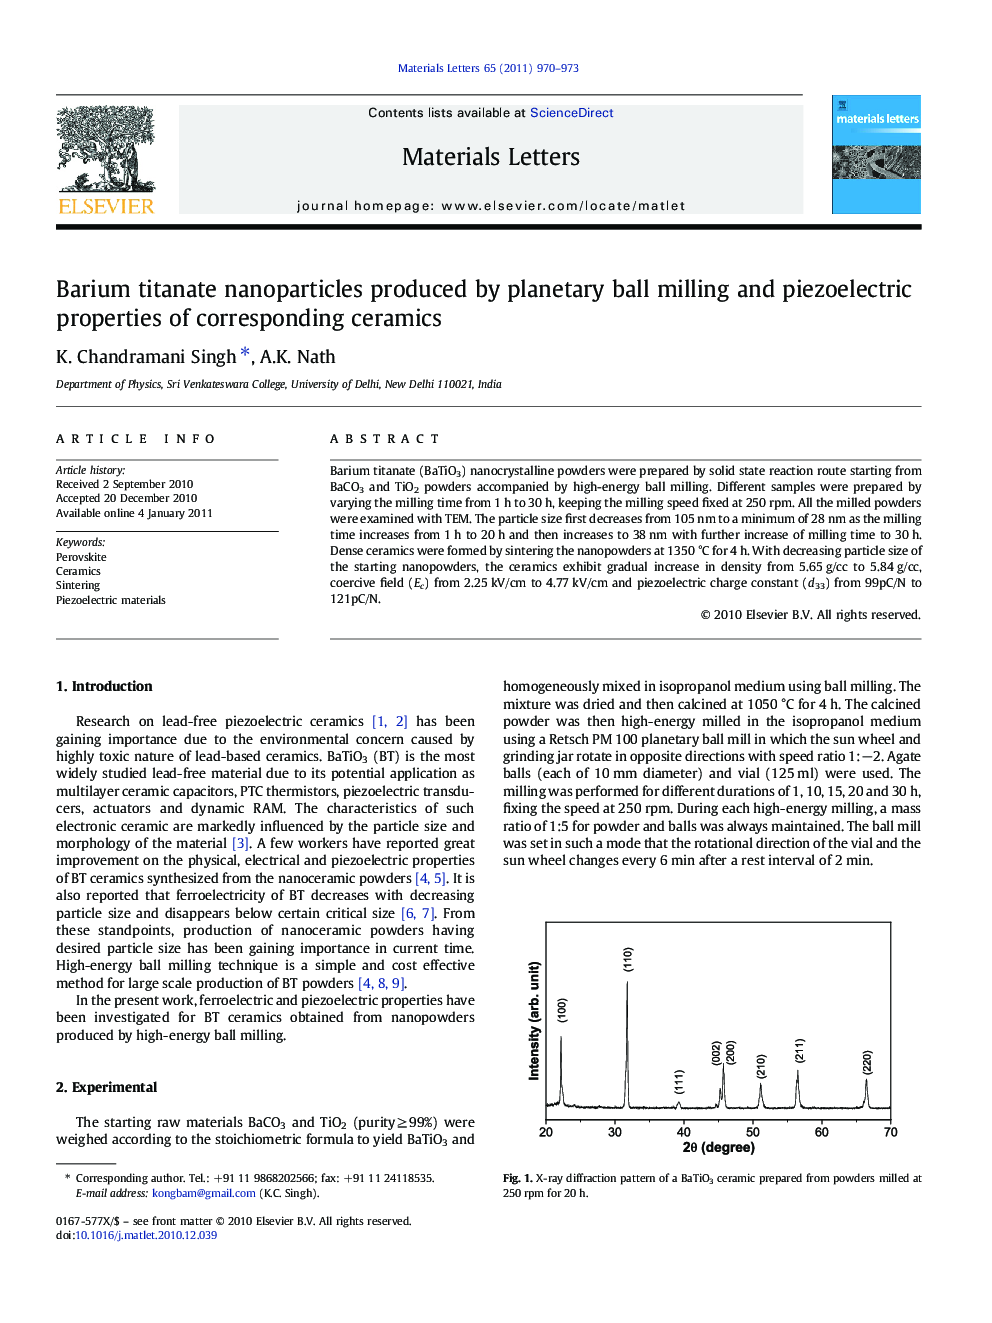 Barium titanate nanoparticles produced by planetary ball milling and piezoelectric properties of corresponding ceramics